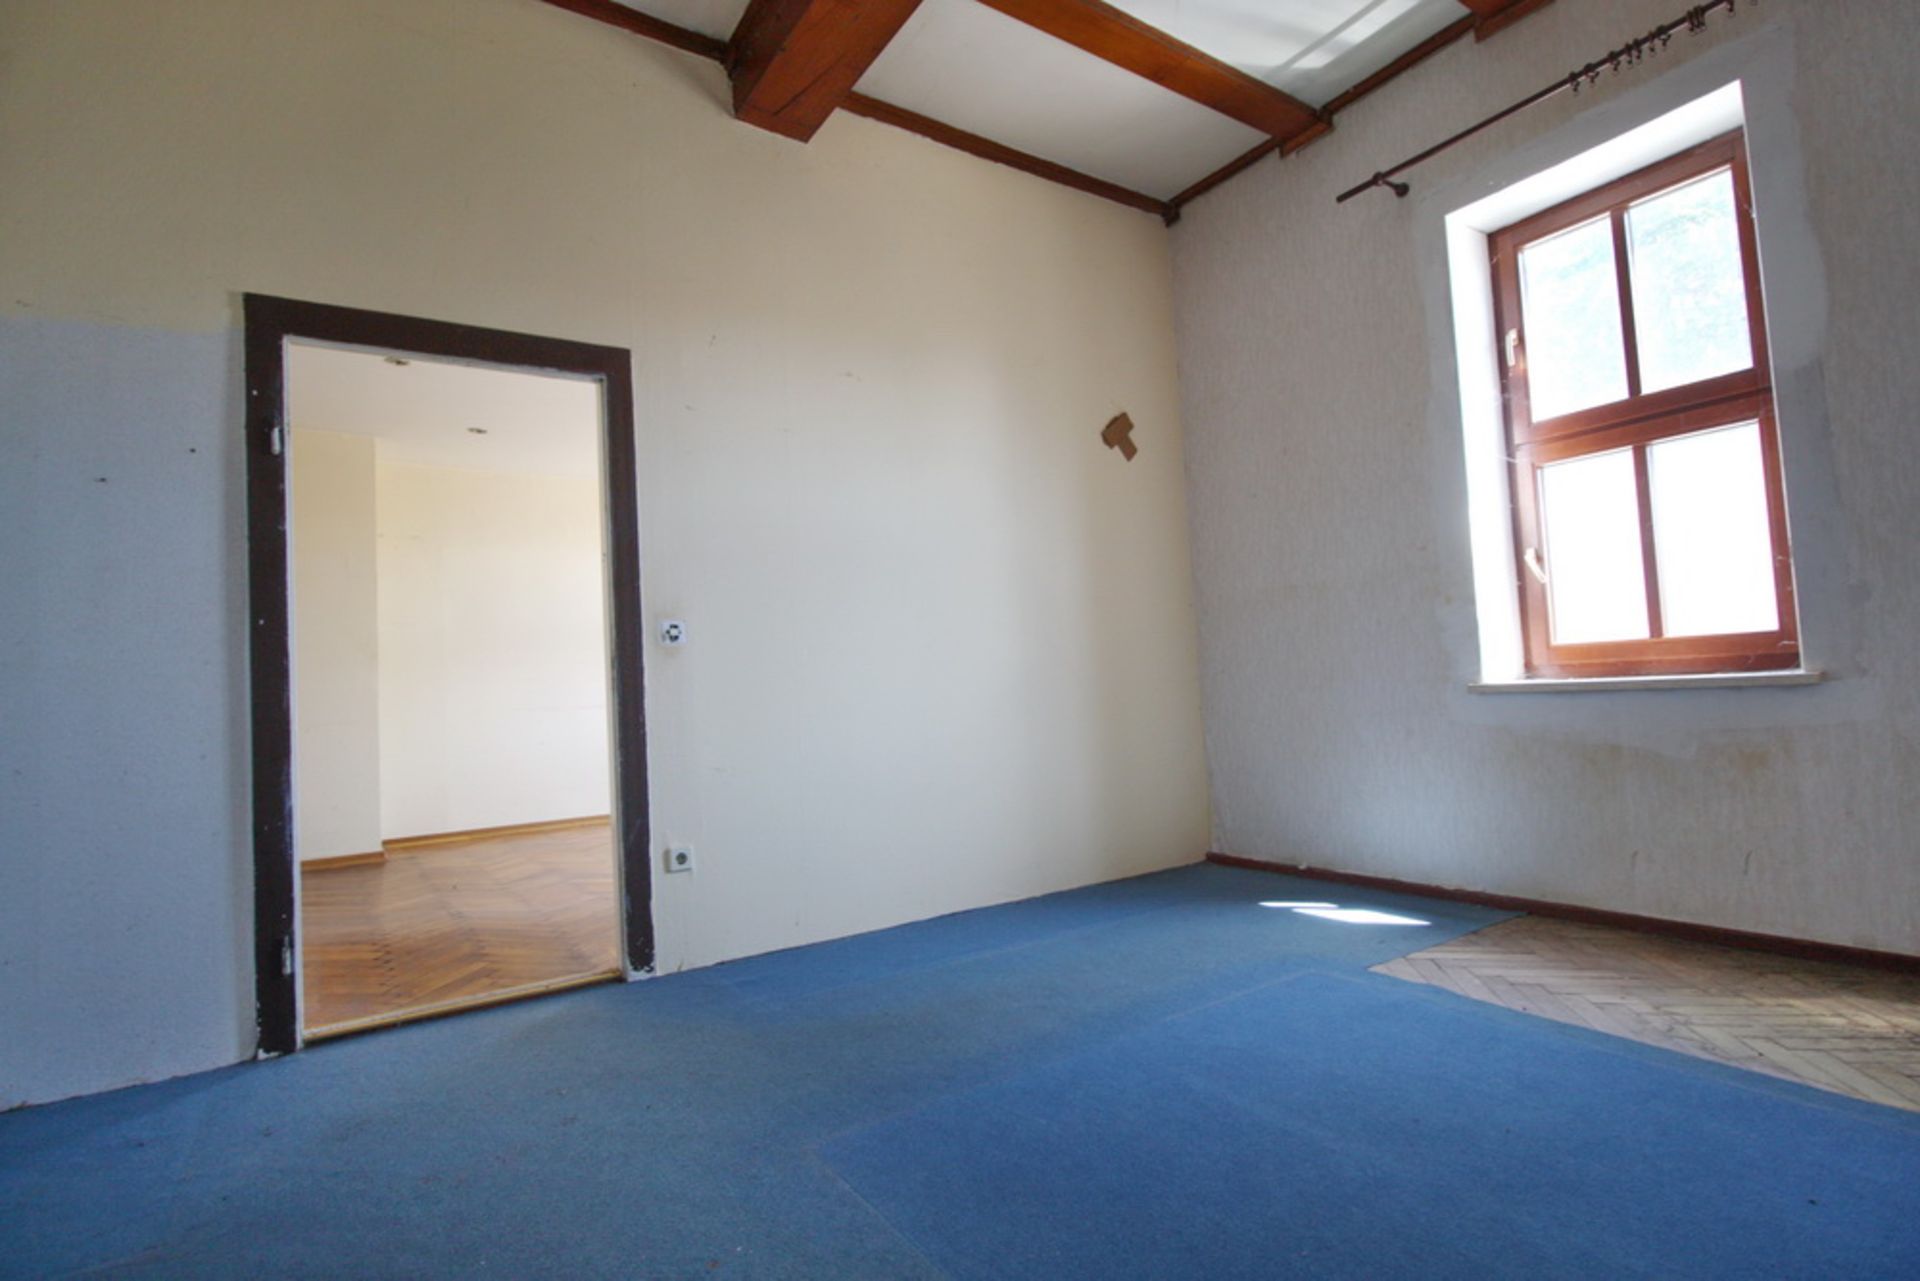 LARGE HOUSING BLOCK HORNSOMMEM, GERMANY READY TO MOVE INTO FREEHOLD VACANT POSSESSION - Image 68 of 91